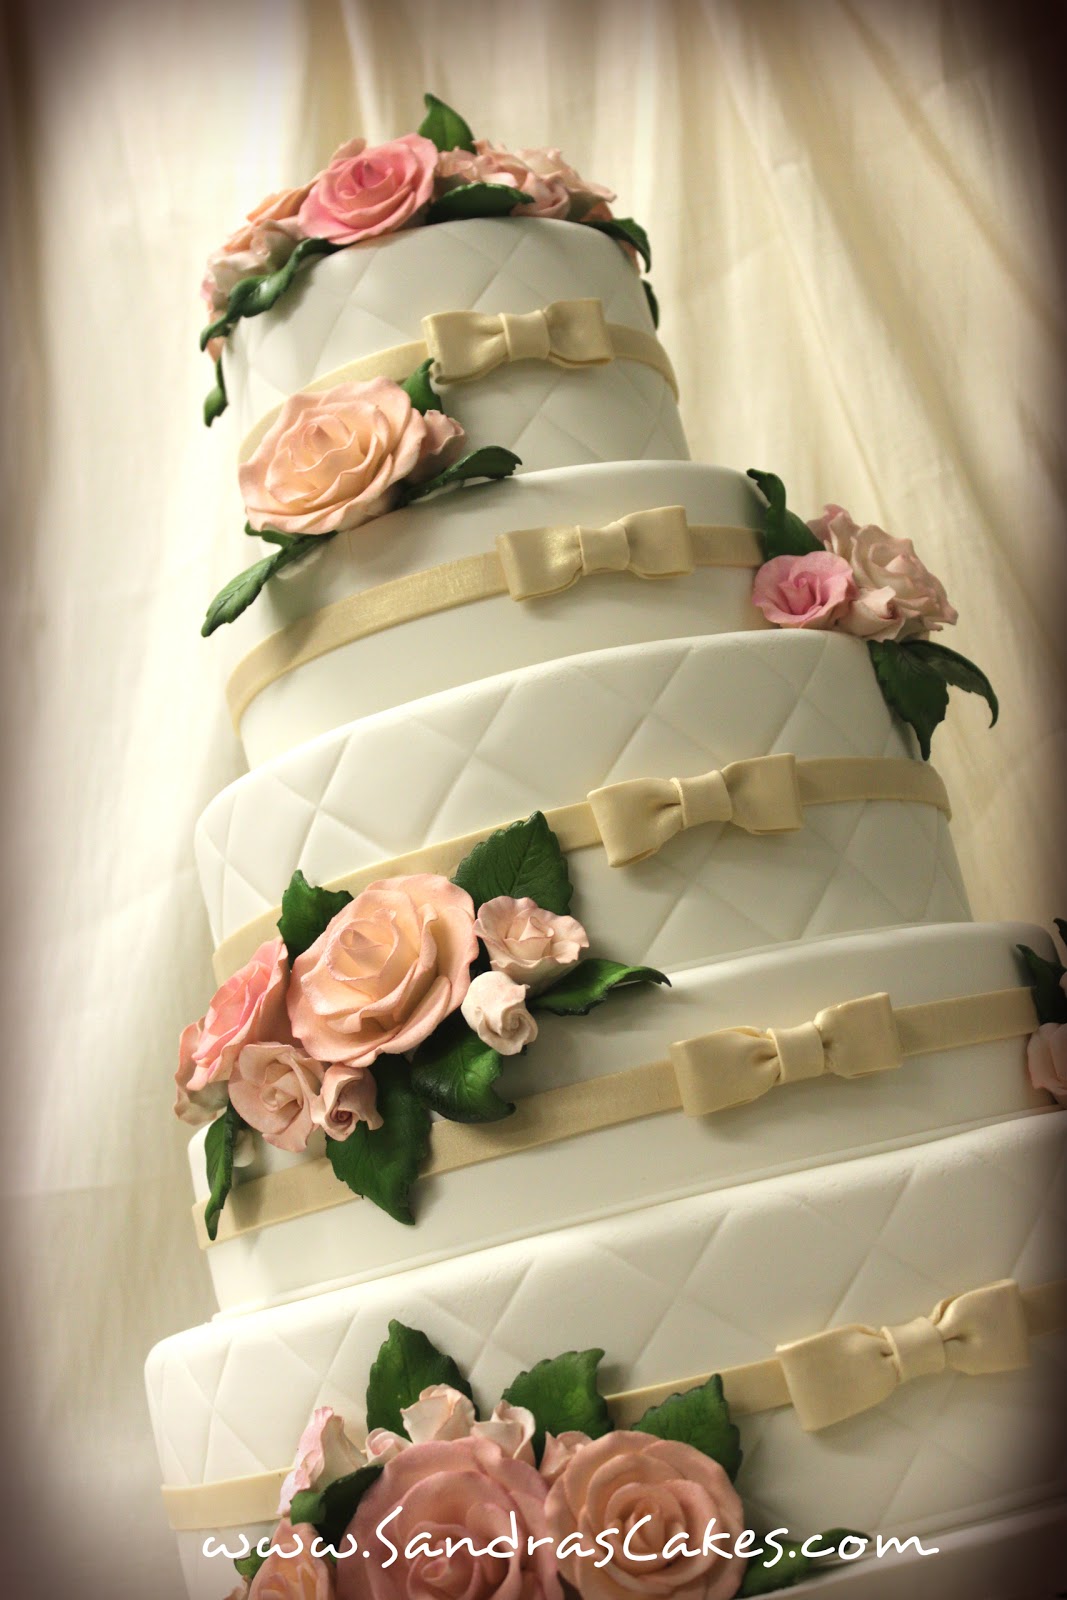 beautiful wedding cake Posted by Sandra's Cakes at 6:19 PM